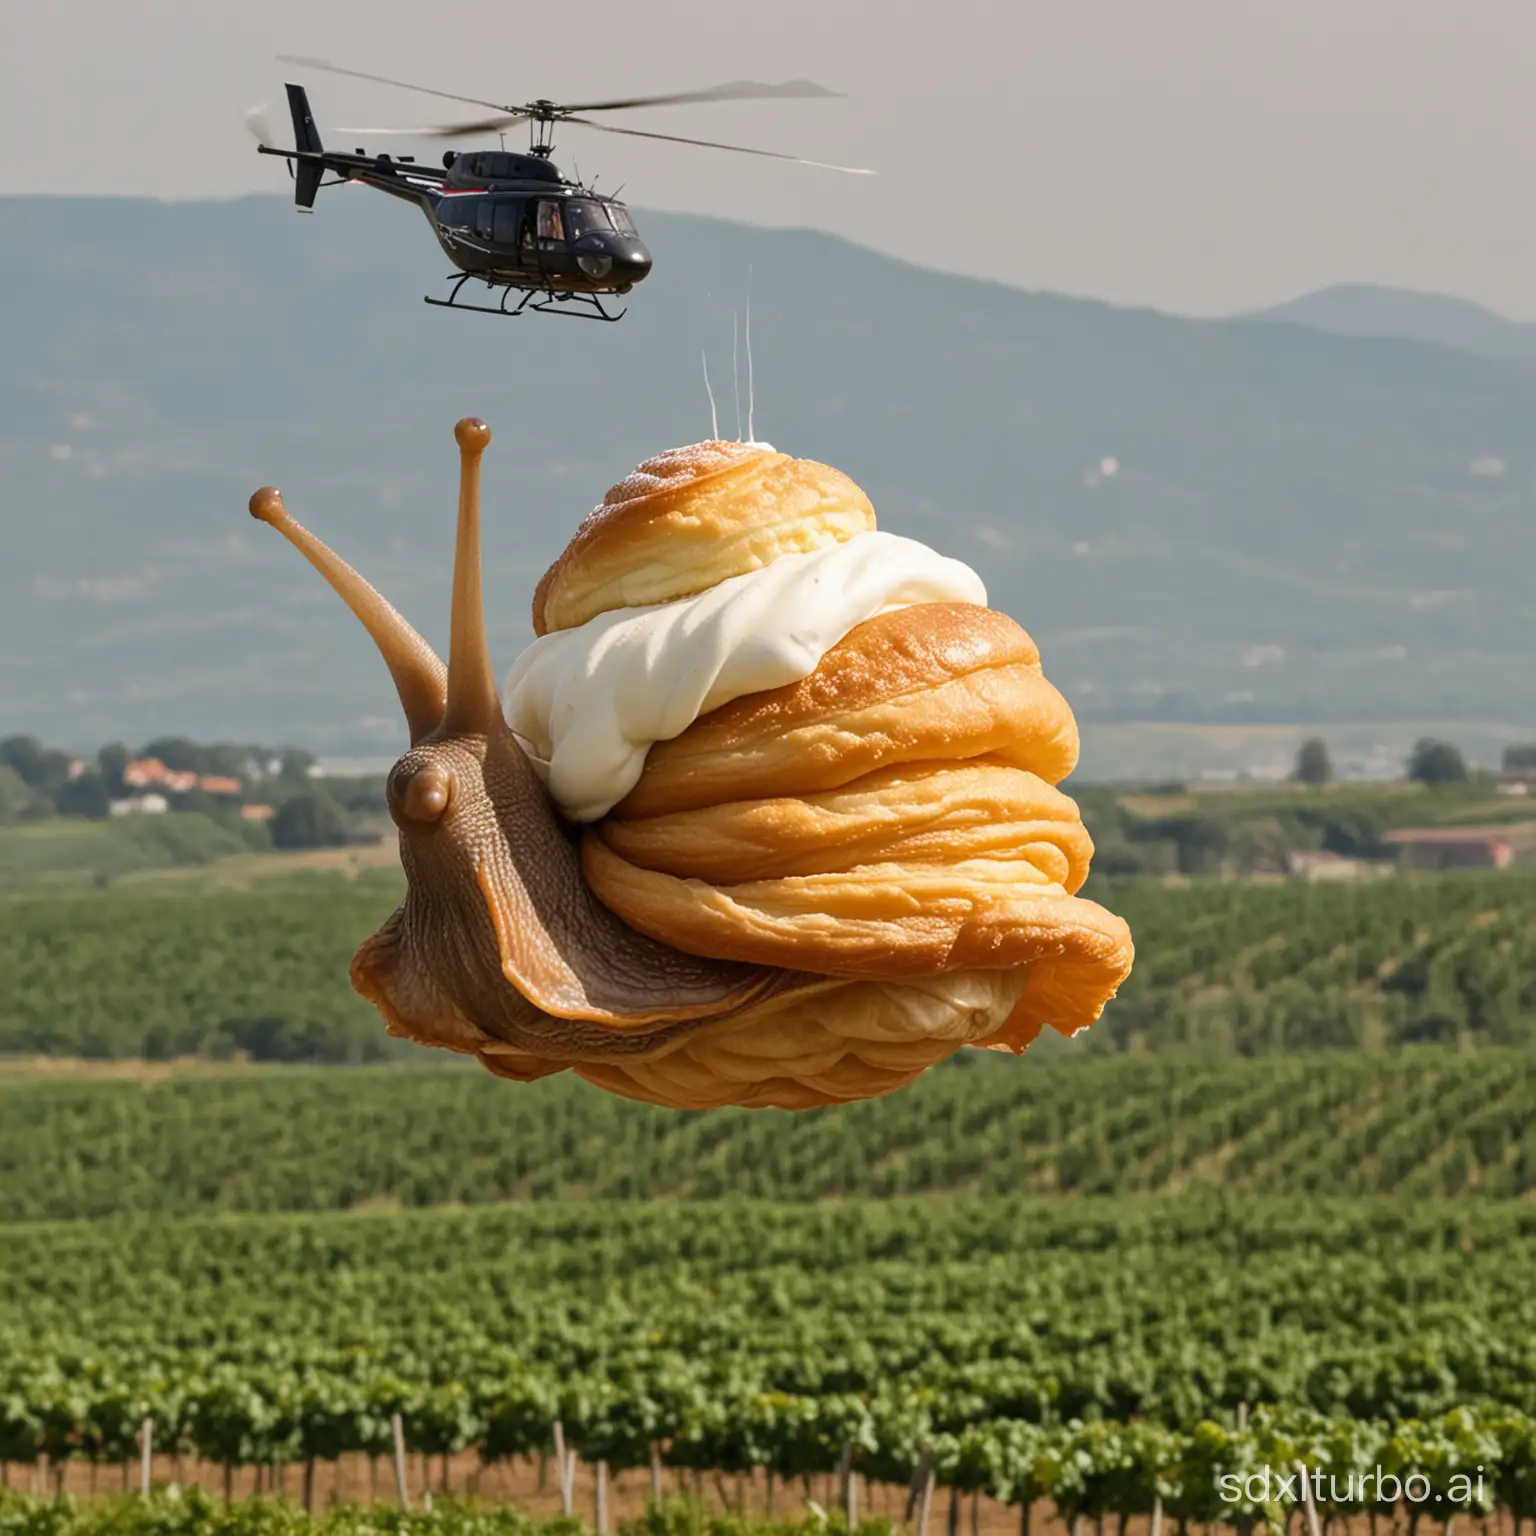 a huge vineyard snail that instead of a house has a cream puff on its back and flies with big helicopter wings